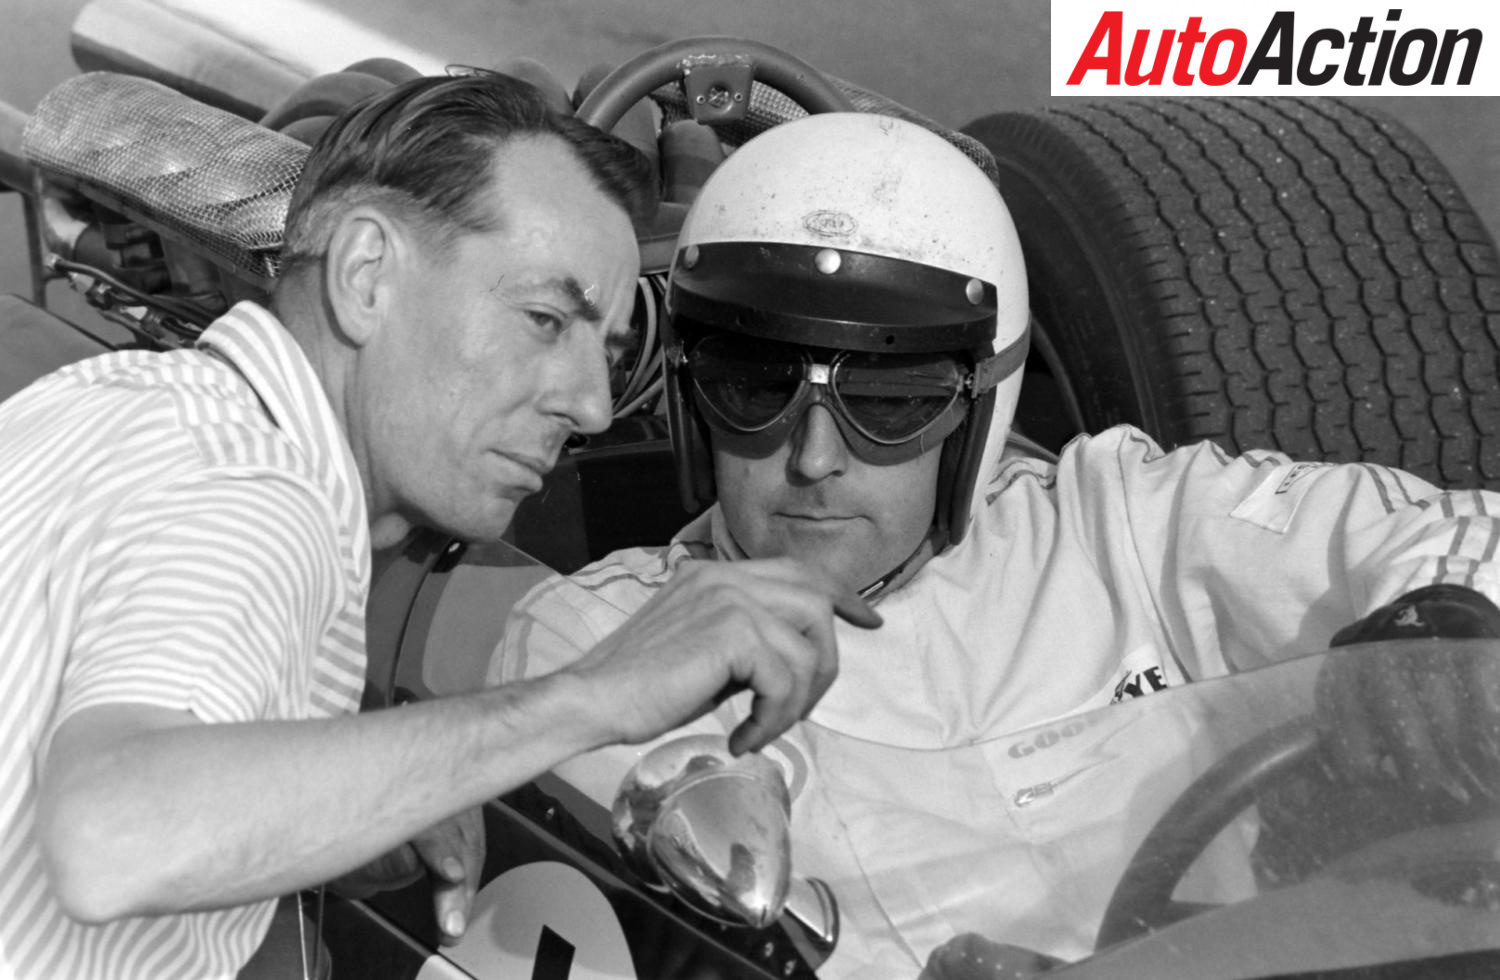 Online tribute service for Ron Tauranac - Photo: Auto Action Archive